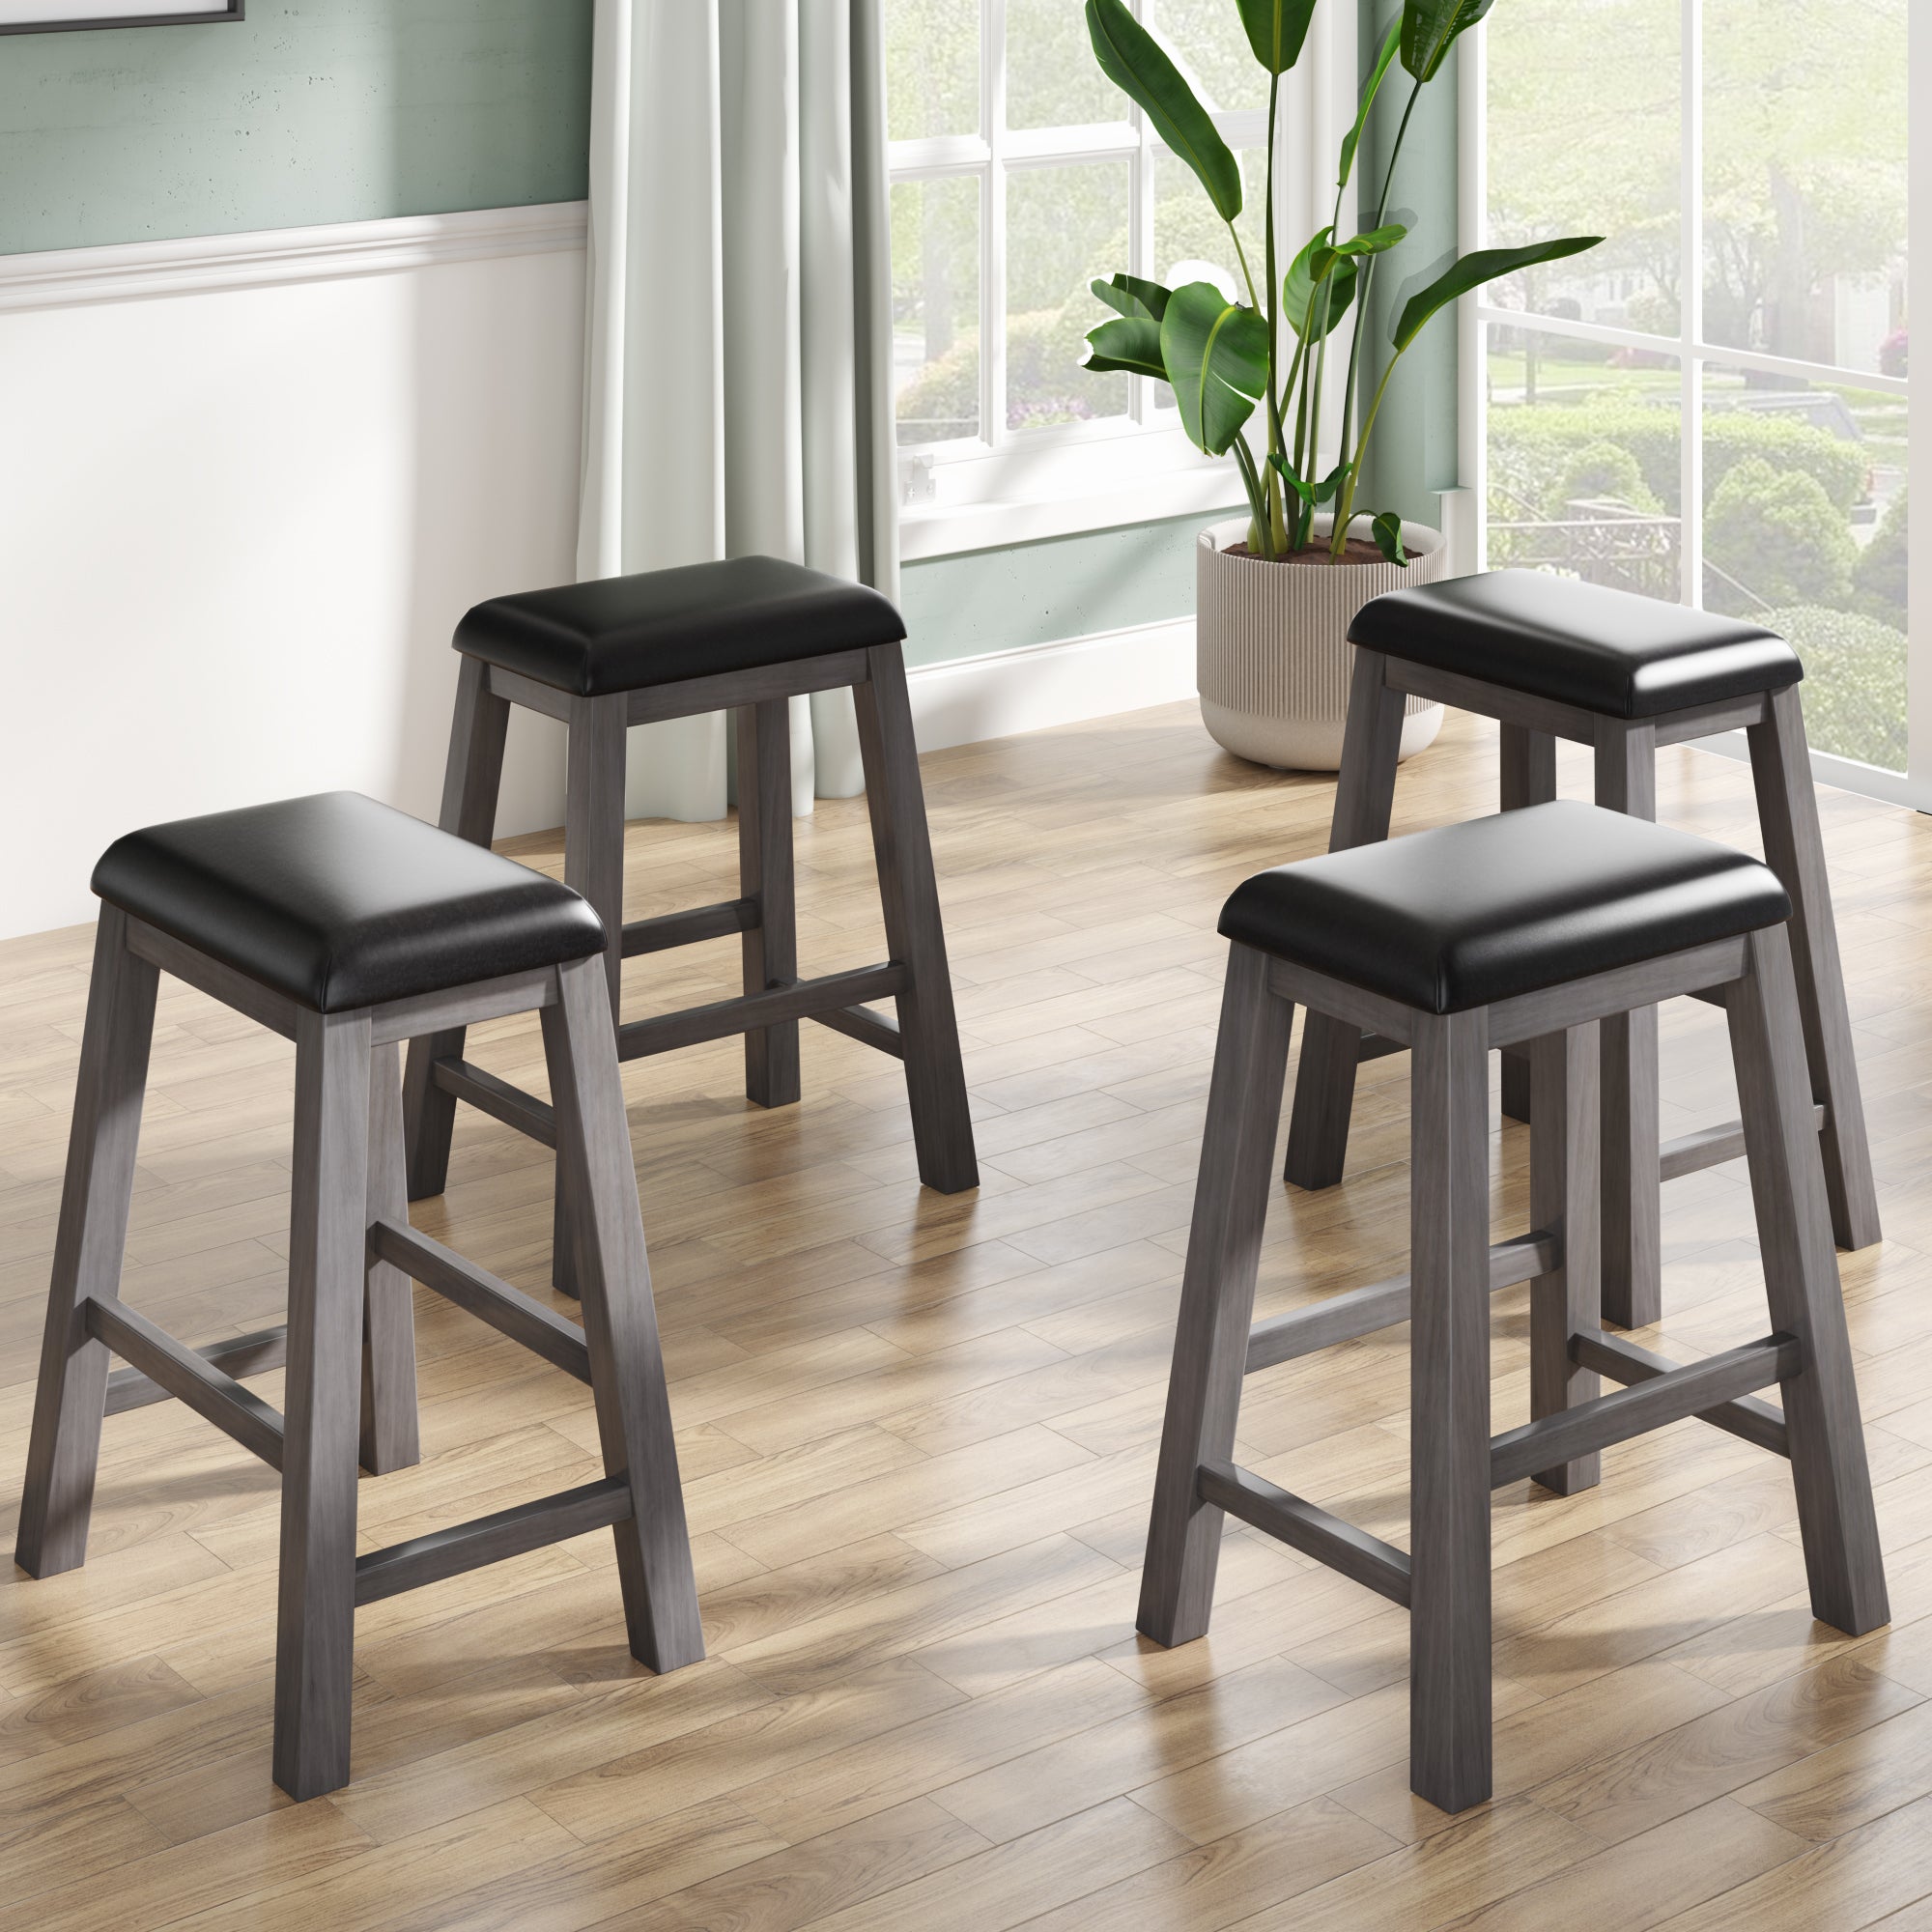 4 Pieces Counter Height Wood Kitchen Dining Upholstered Stools for Small Places